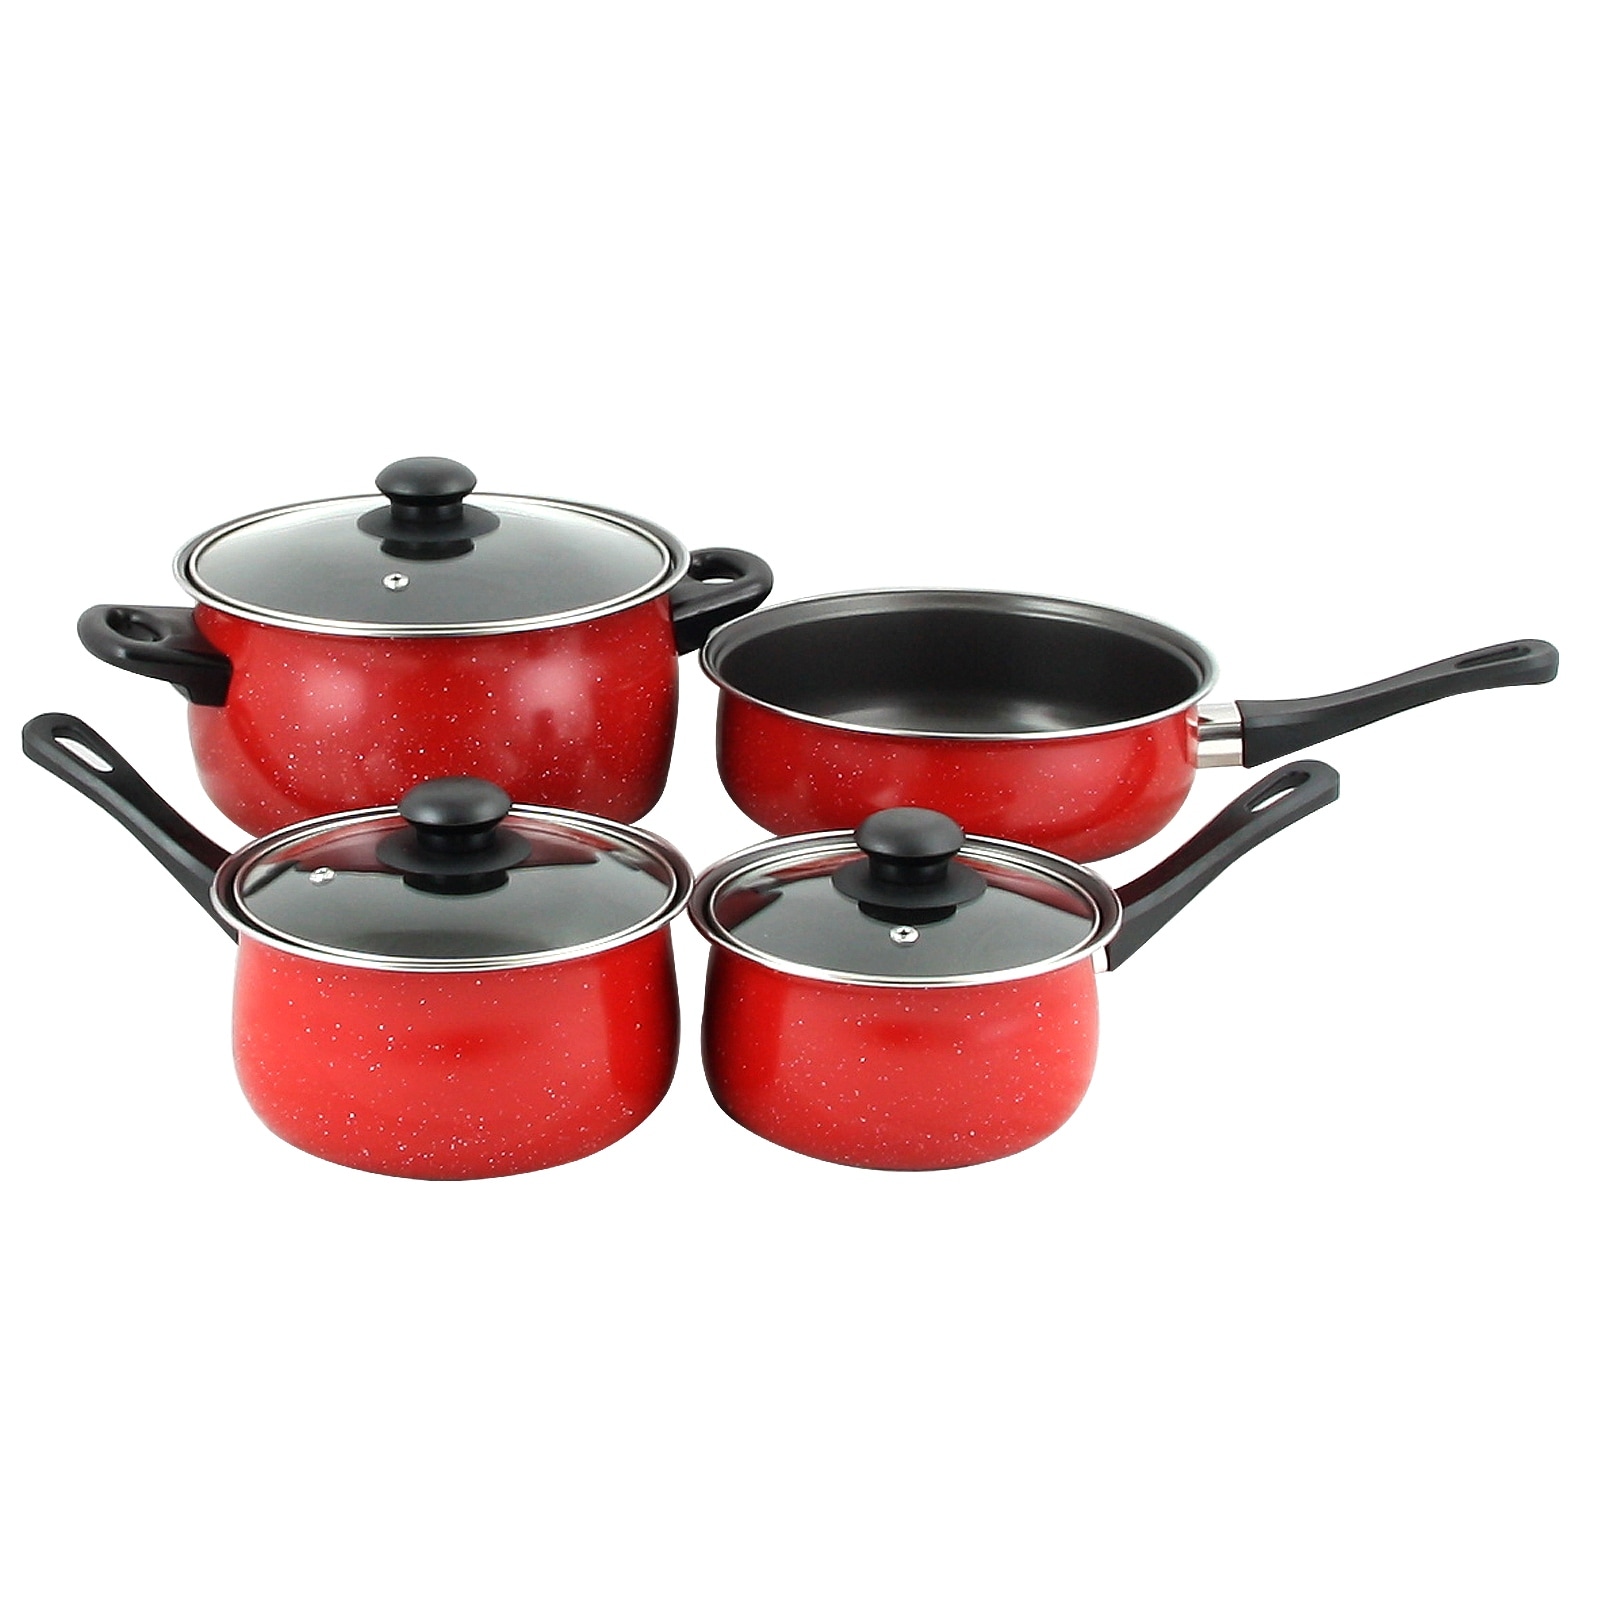 T-Fal Excite 2-Piece Frying Pan Set, Cherry